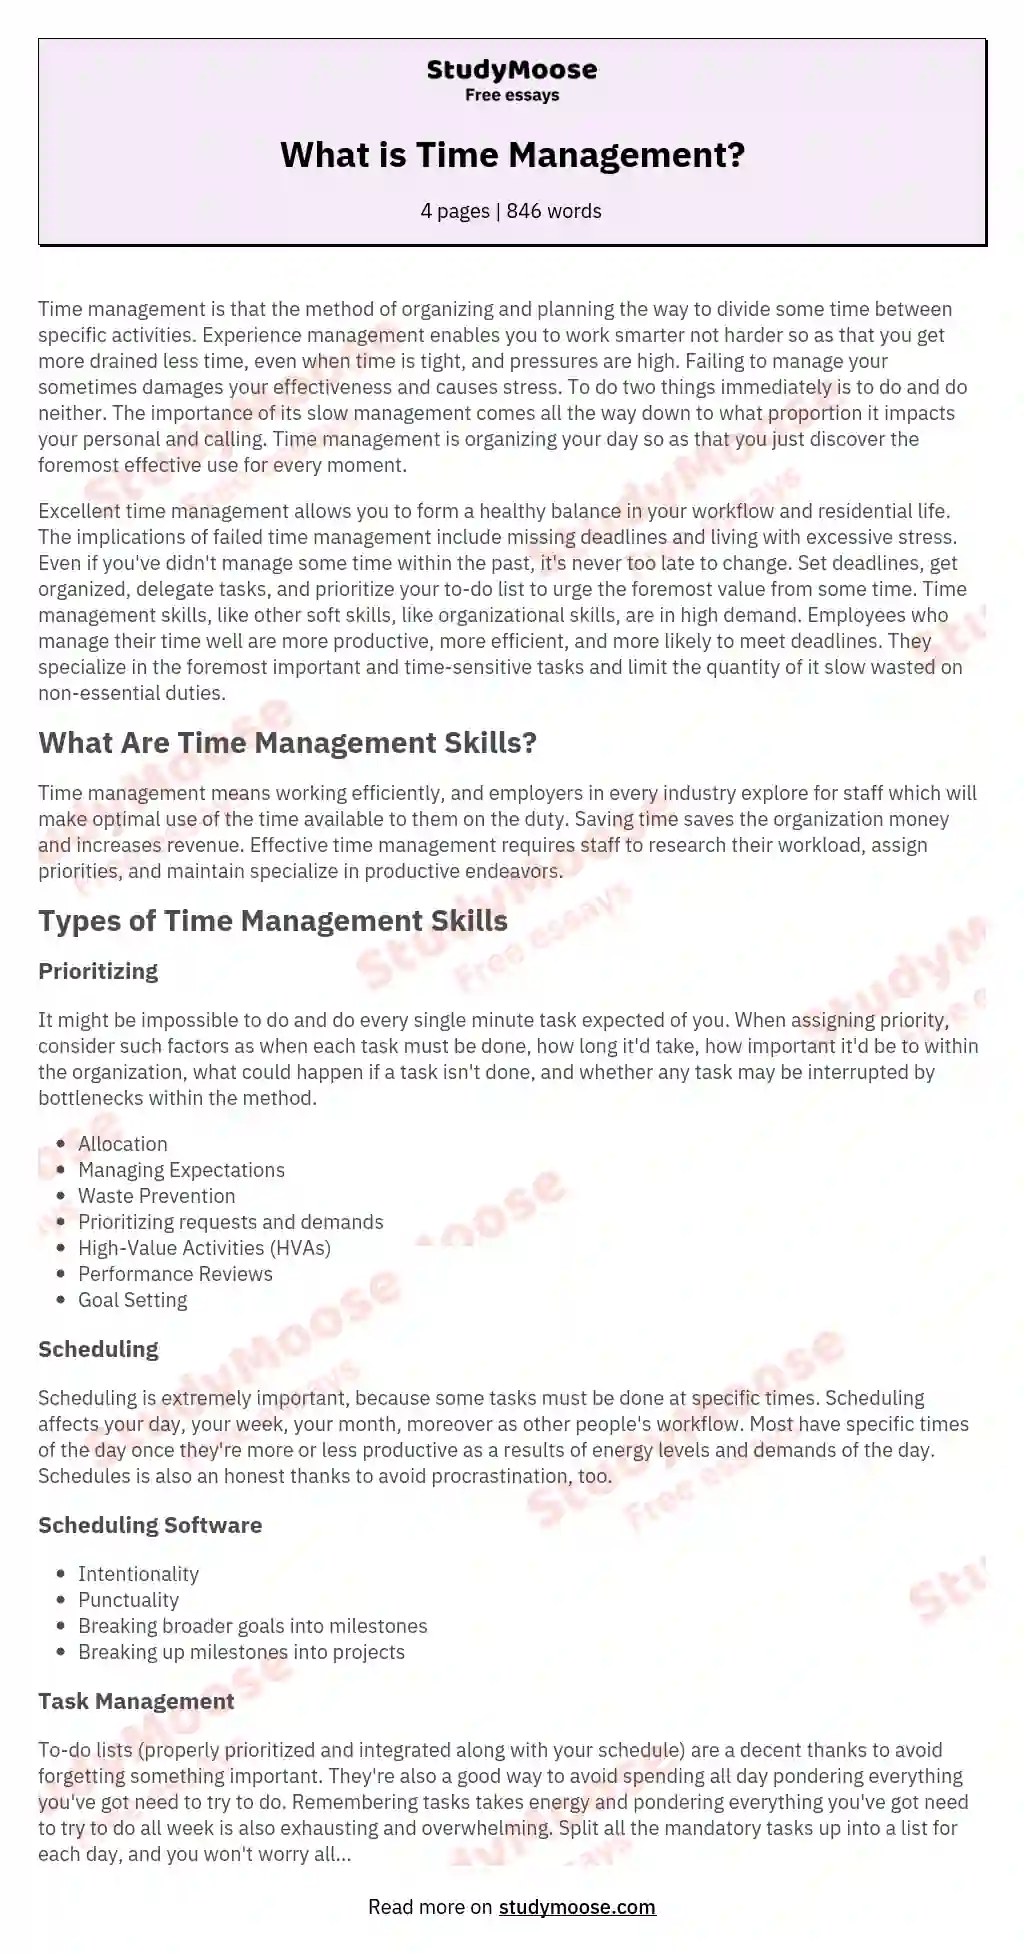 What is Time Management? essay